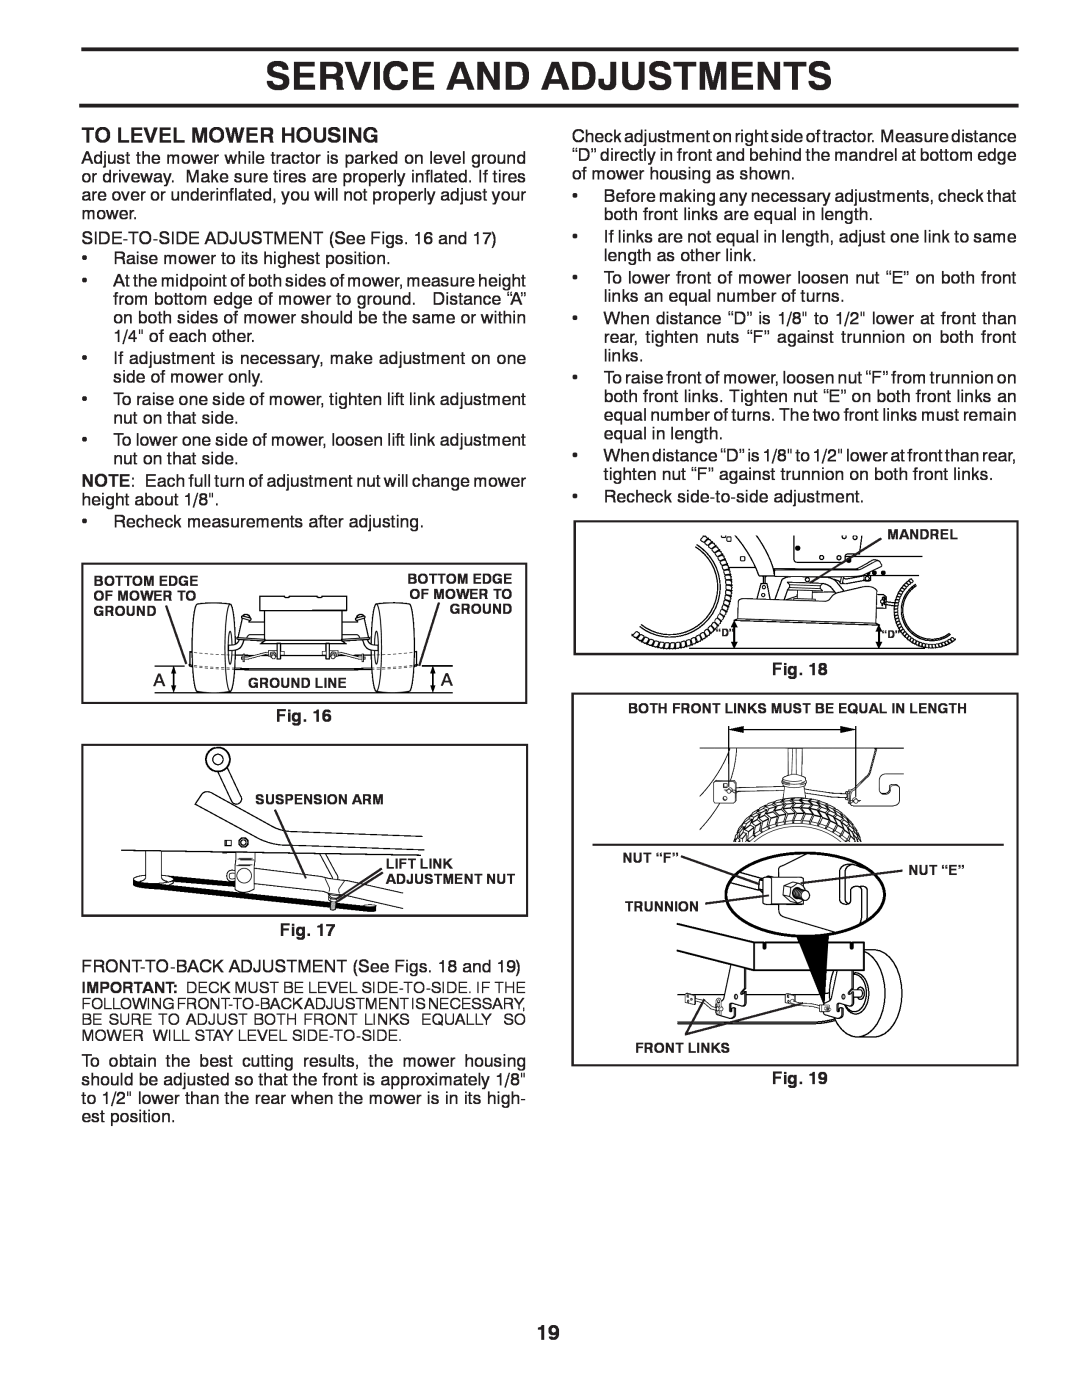 Poulan 96012011000, 438719 manual To Level Mower Housing, Service And Adjustments 